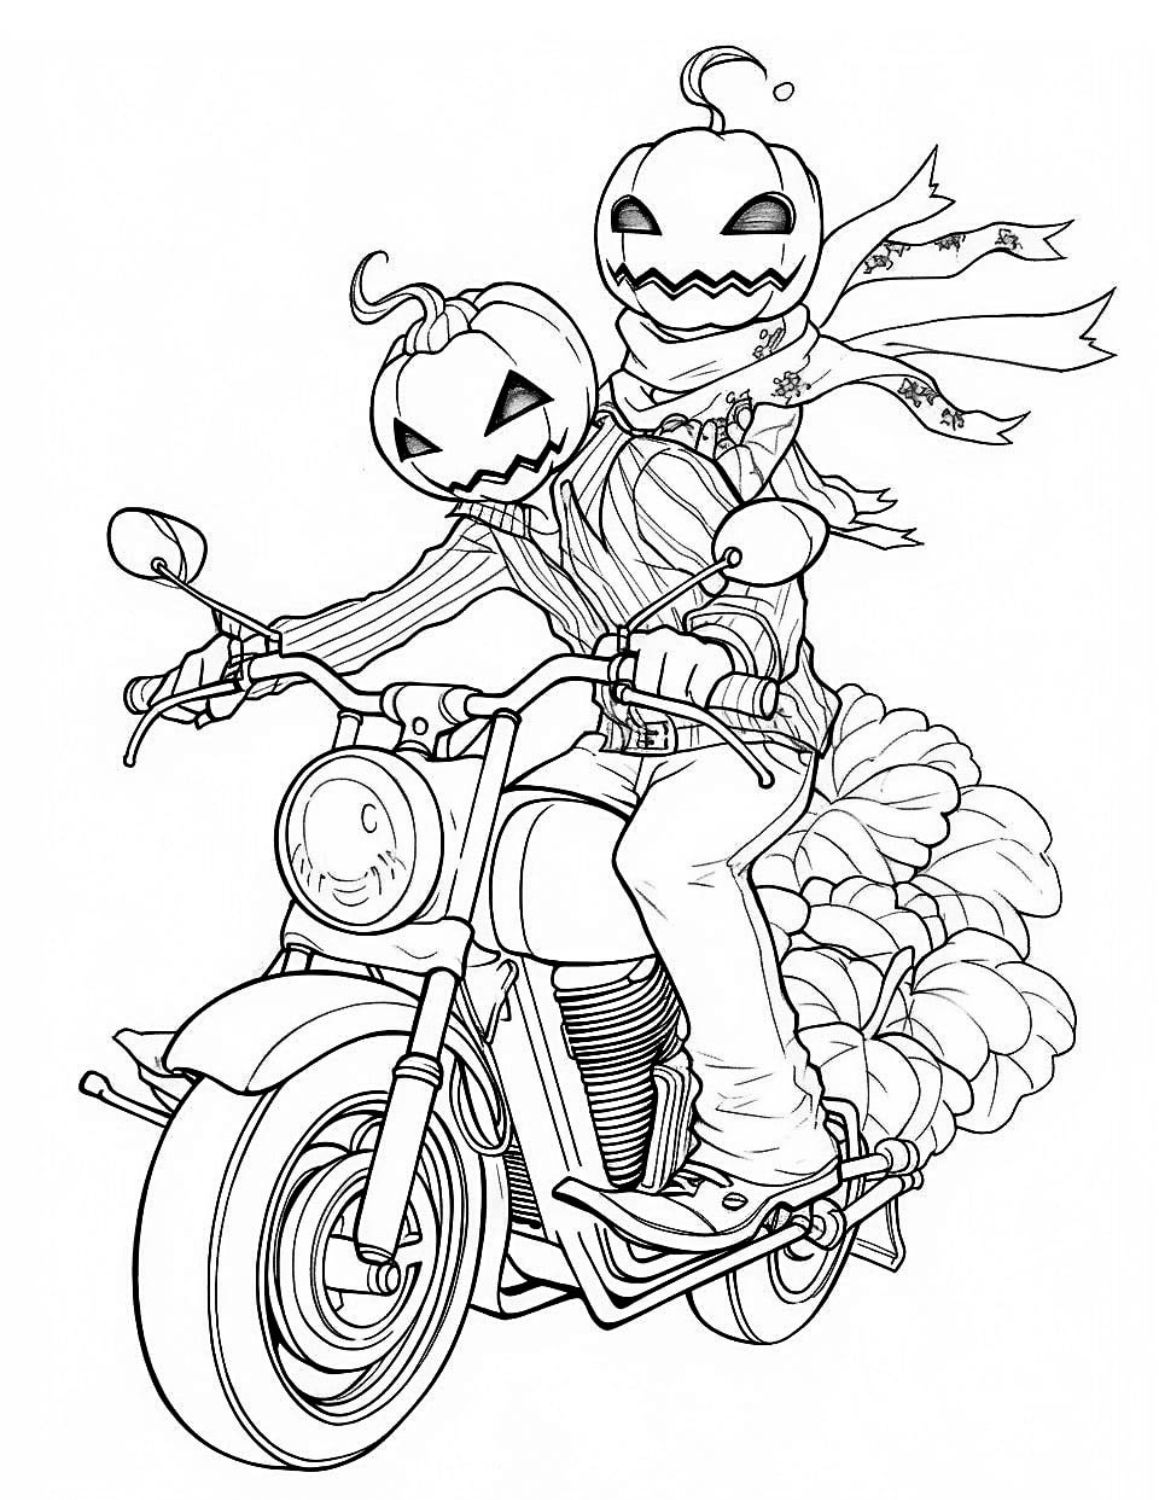 Motorcycle Coloring Page - Ultra Coloring Pages